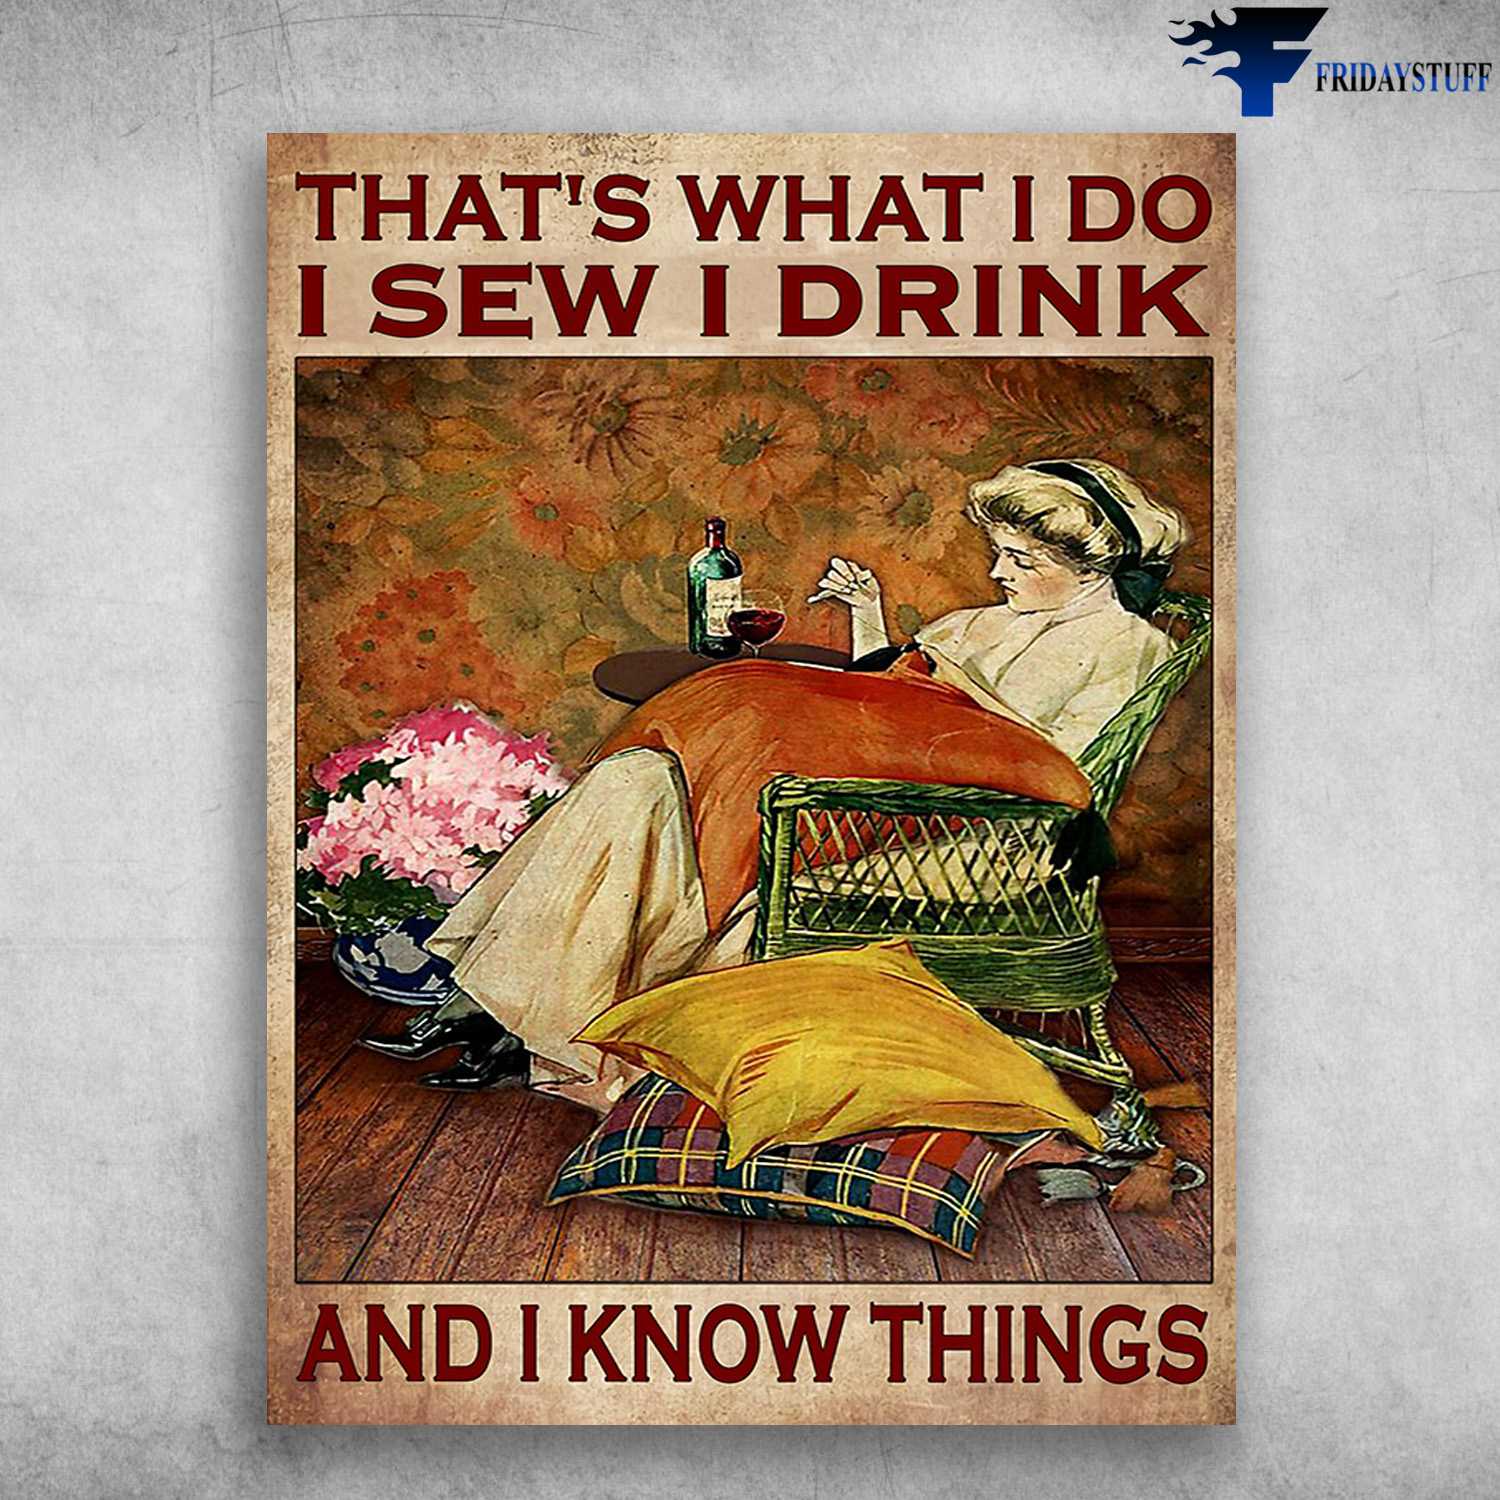 Sewing With Wine, Sewing Woman - That's What I Do, I Sew, I Drink, And I Know Things